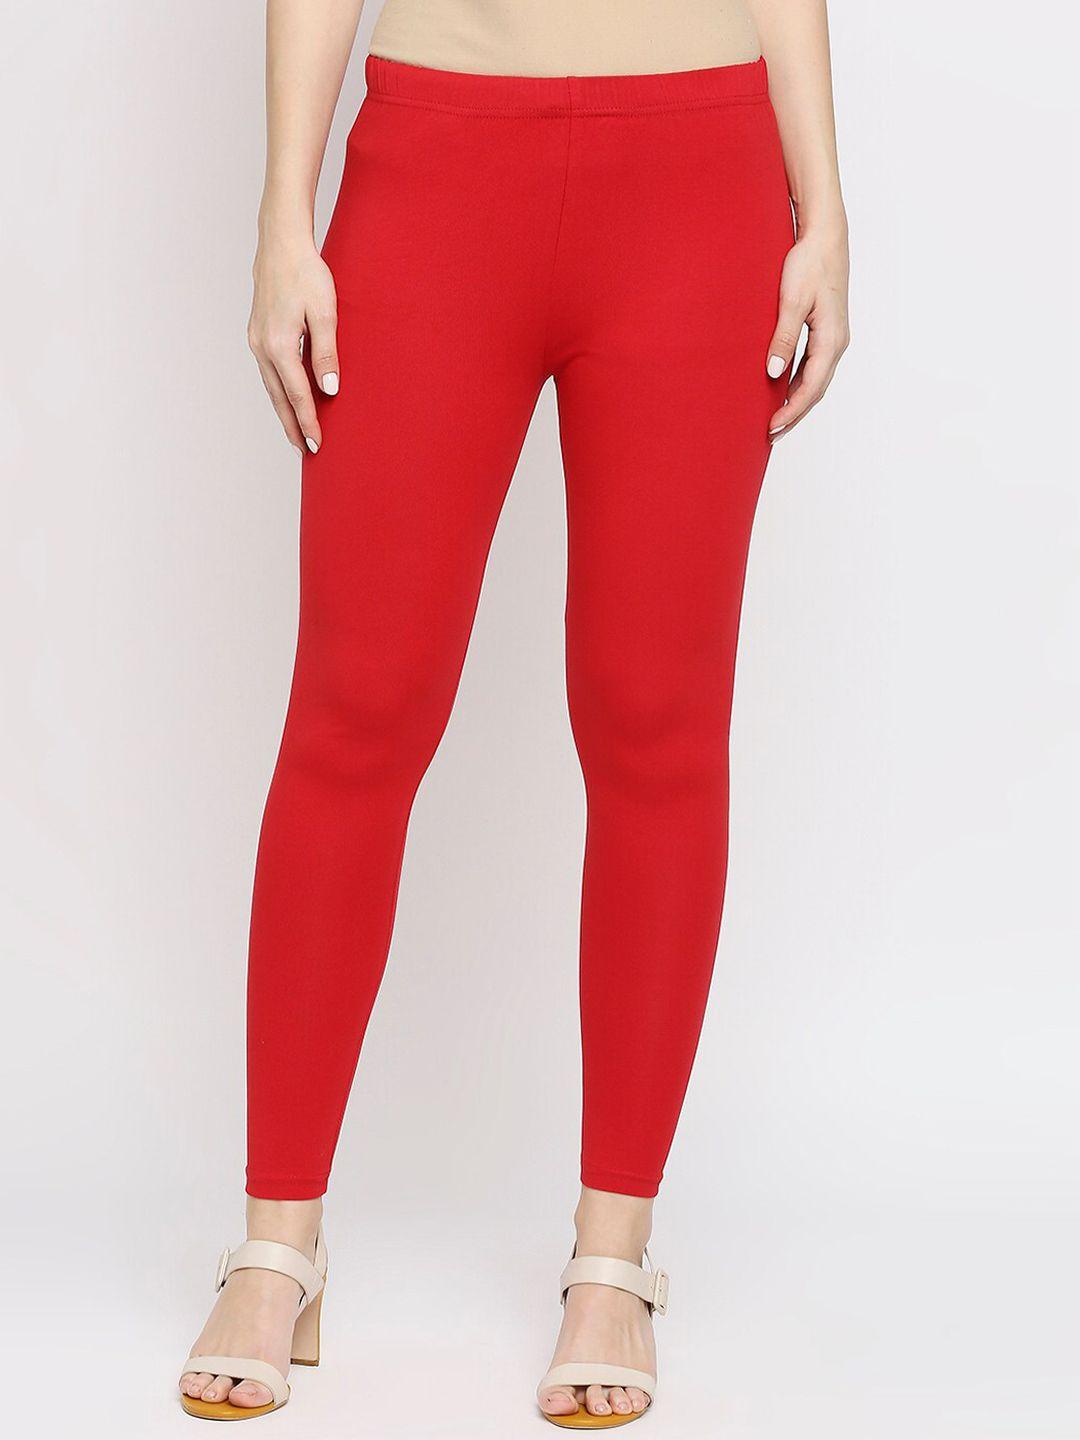 ethnicity women red solid ankle-length leggings